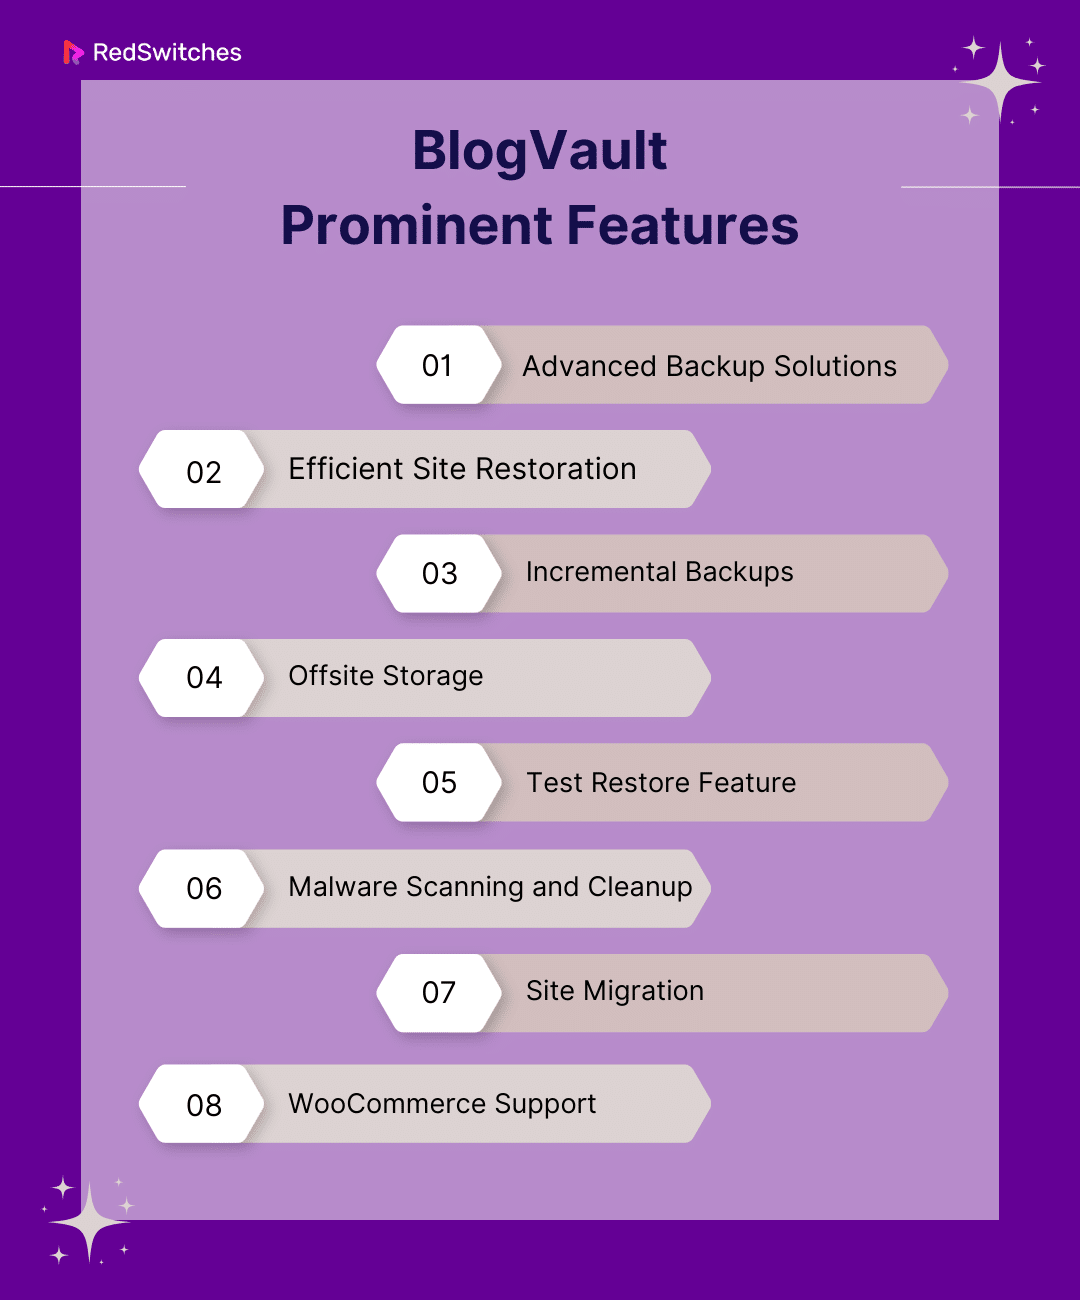 BlogVault Prominent Features